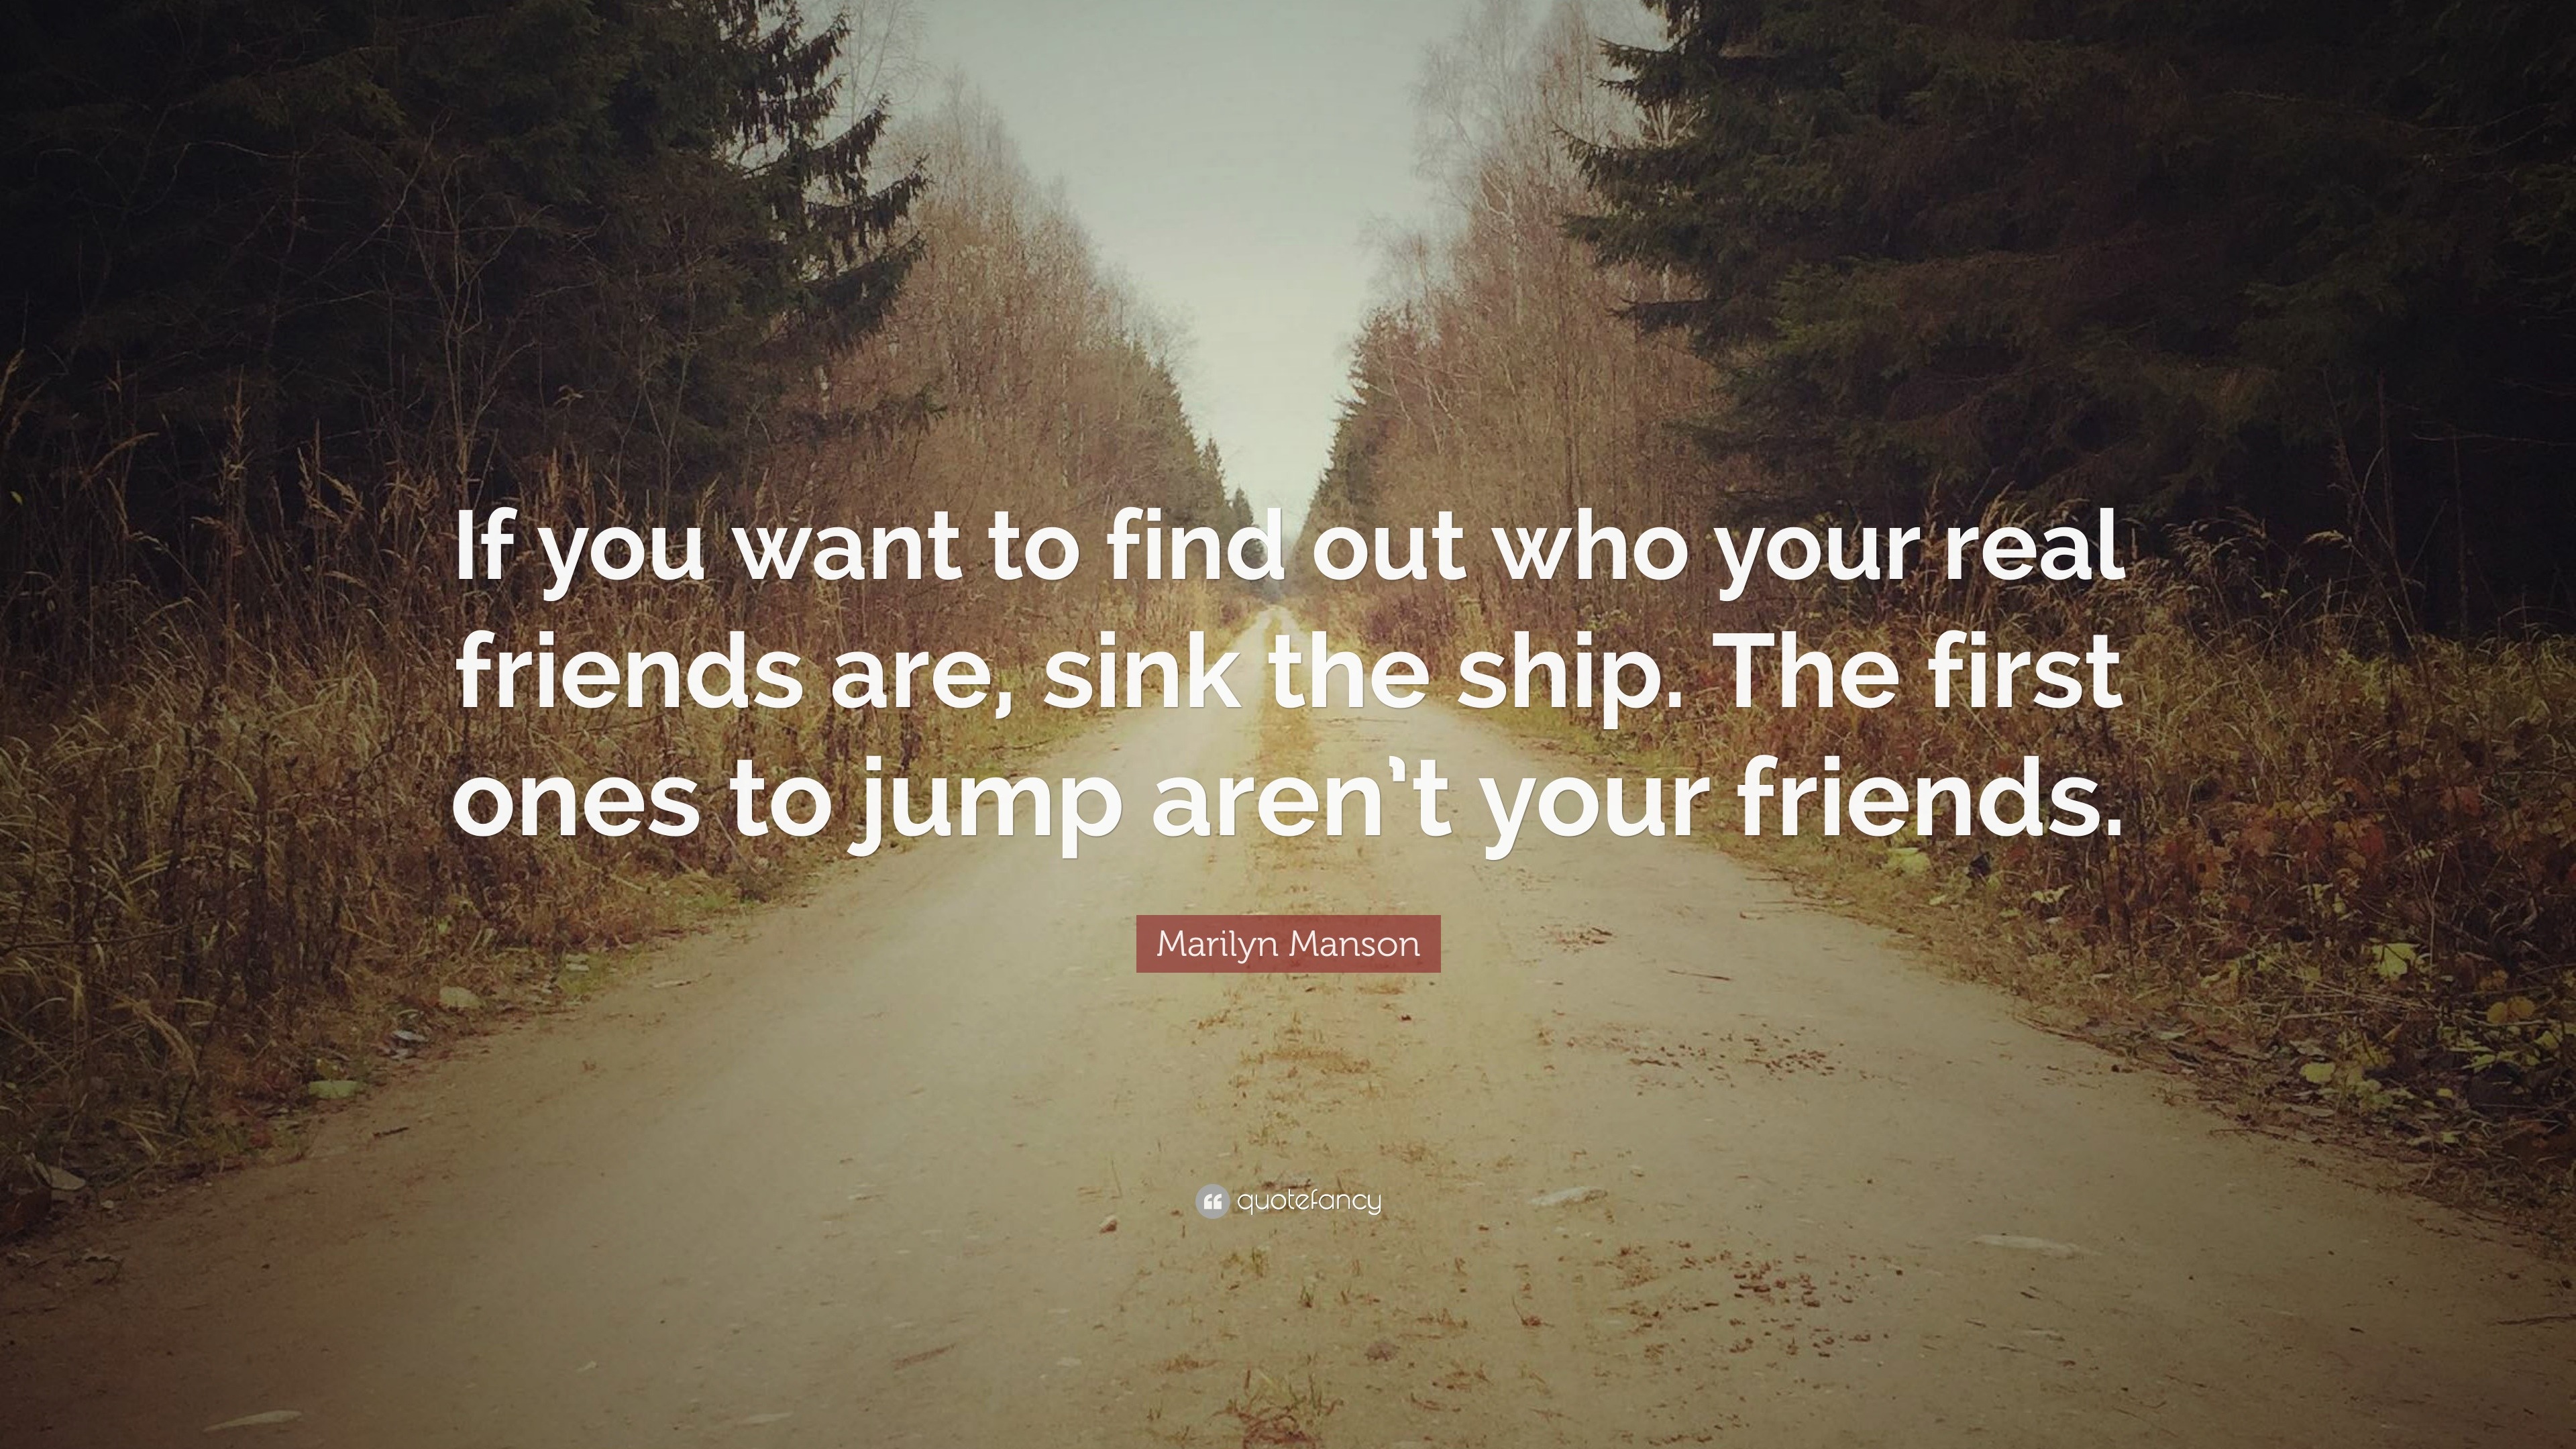 Marilyn Manson Quote: “If you want to find out who your real friends